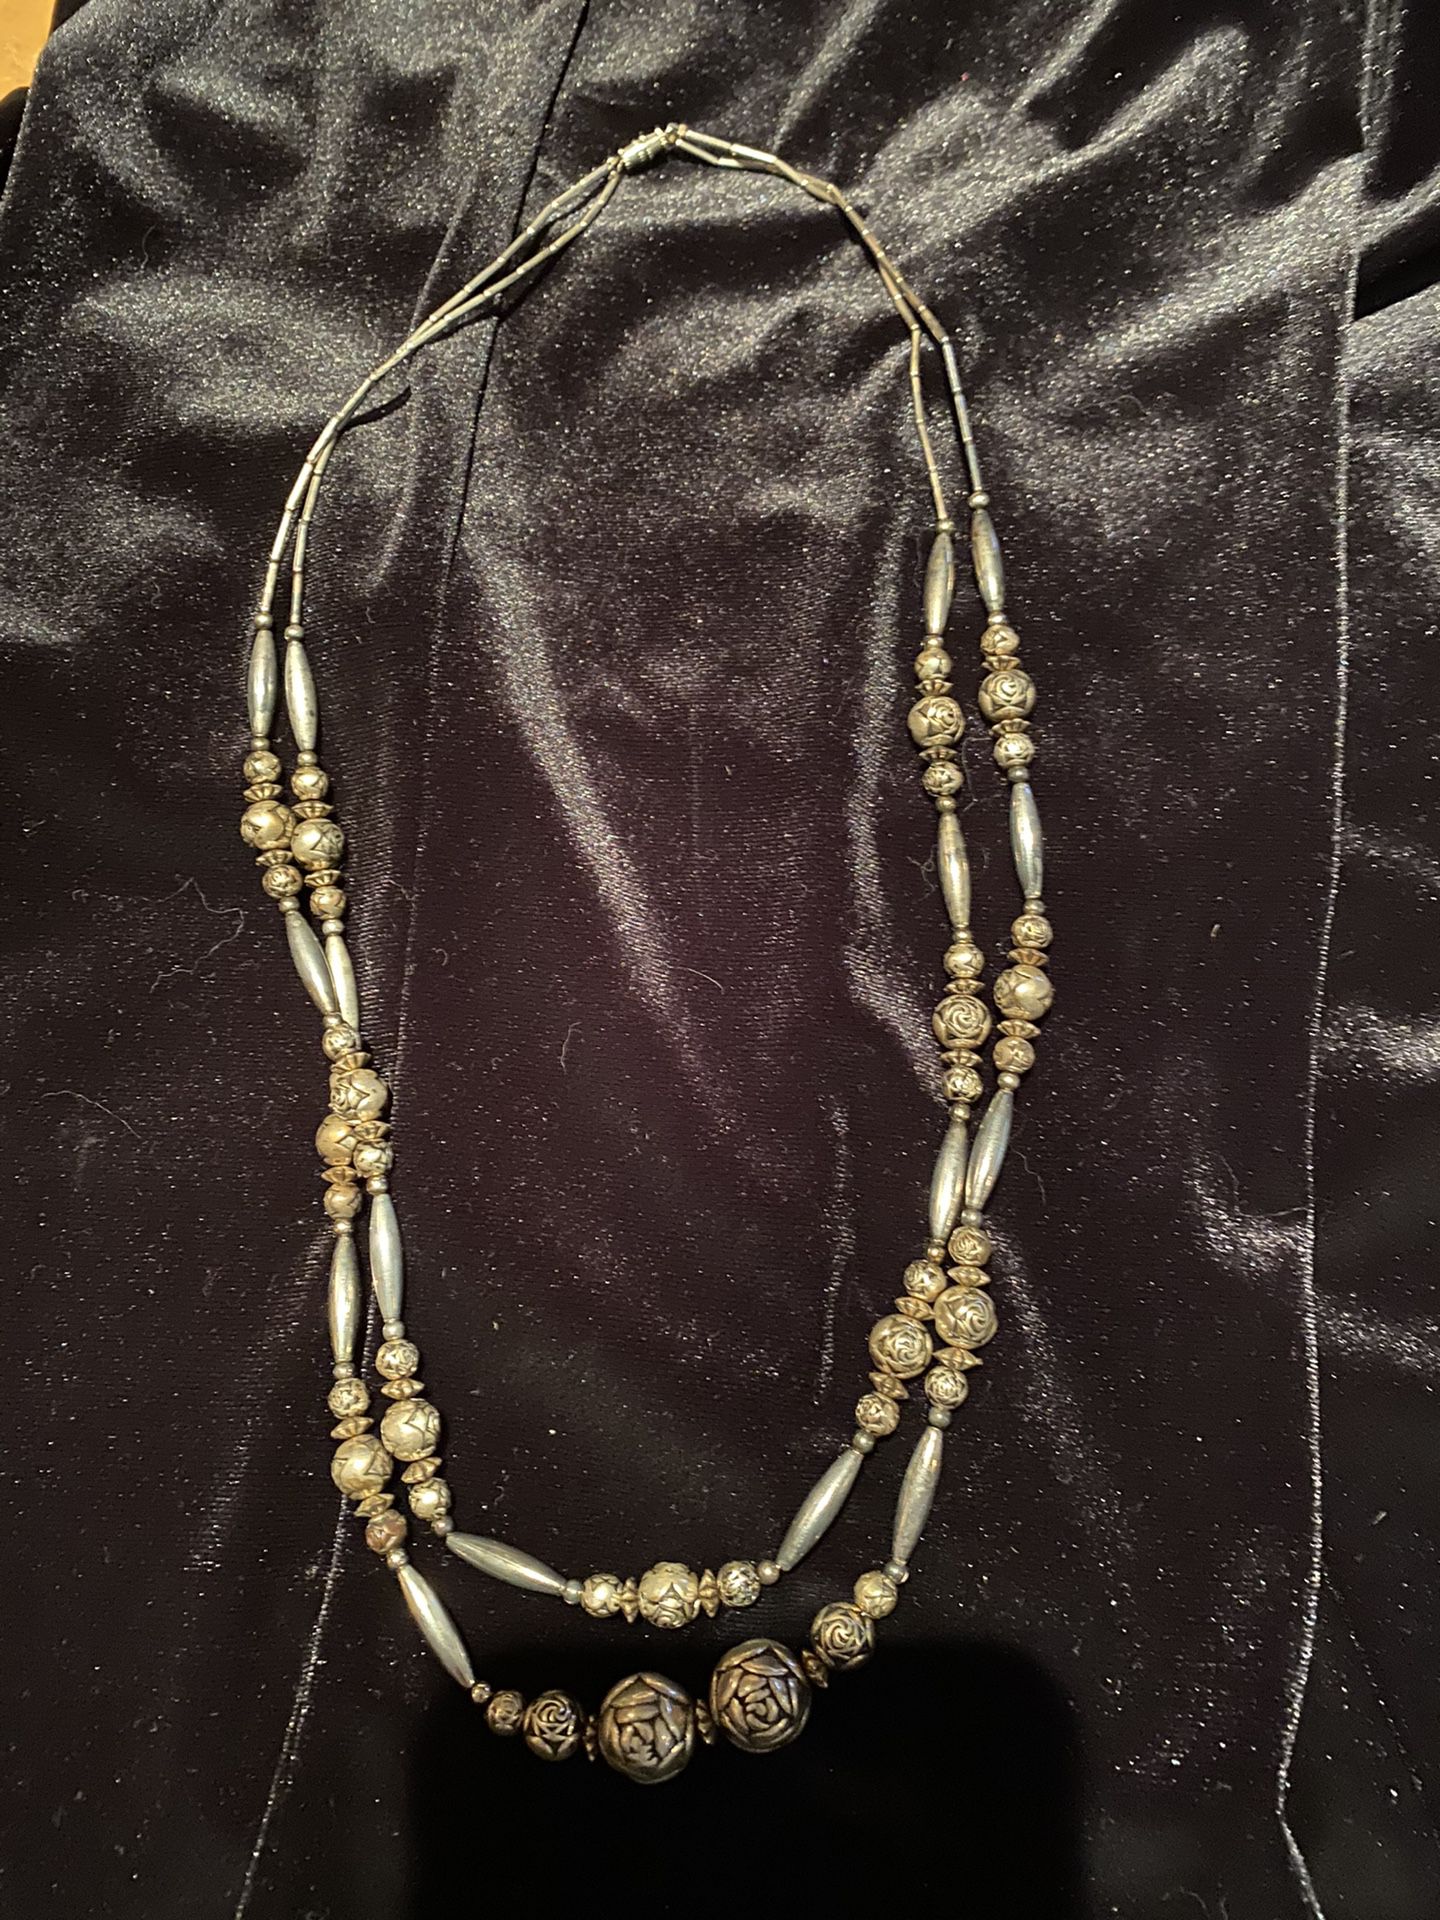 Mexican silver beaded necklace from Mexico $25